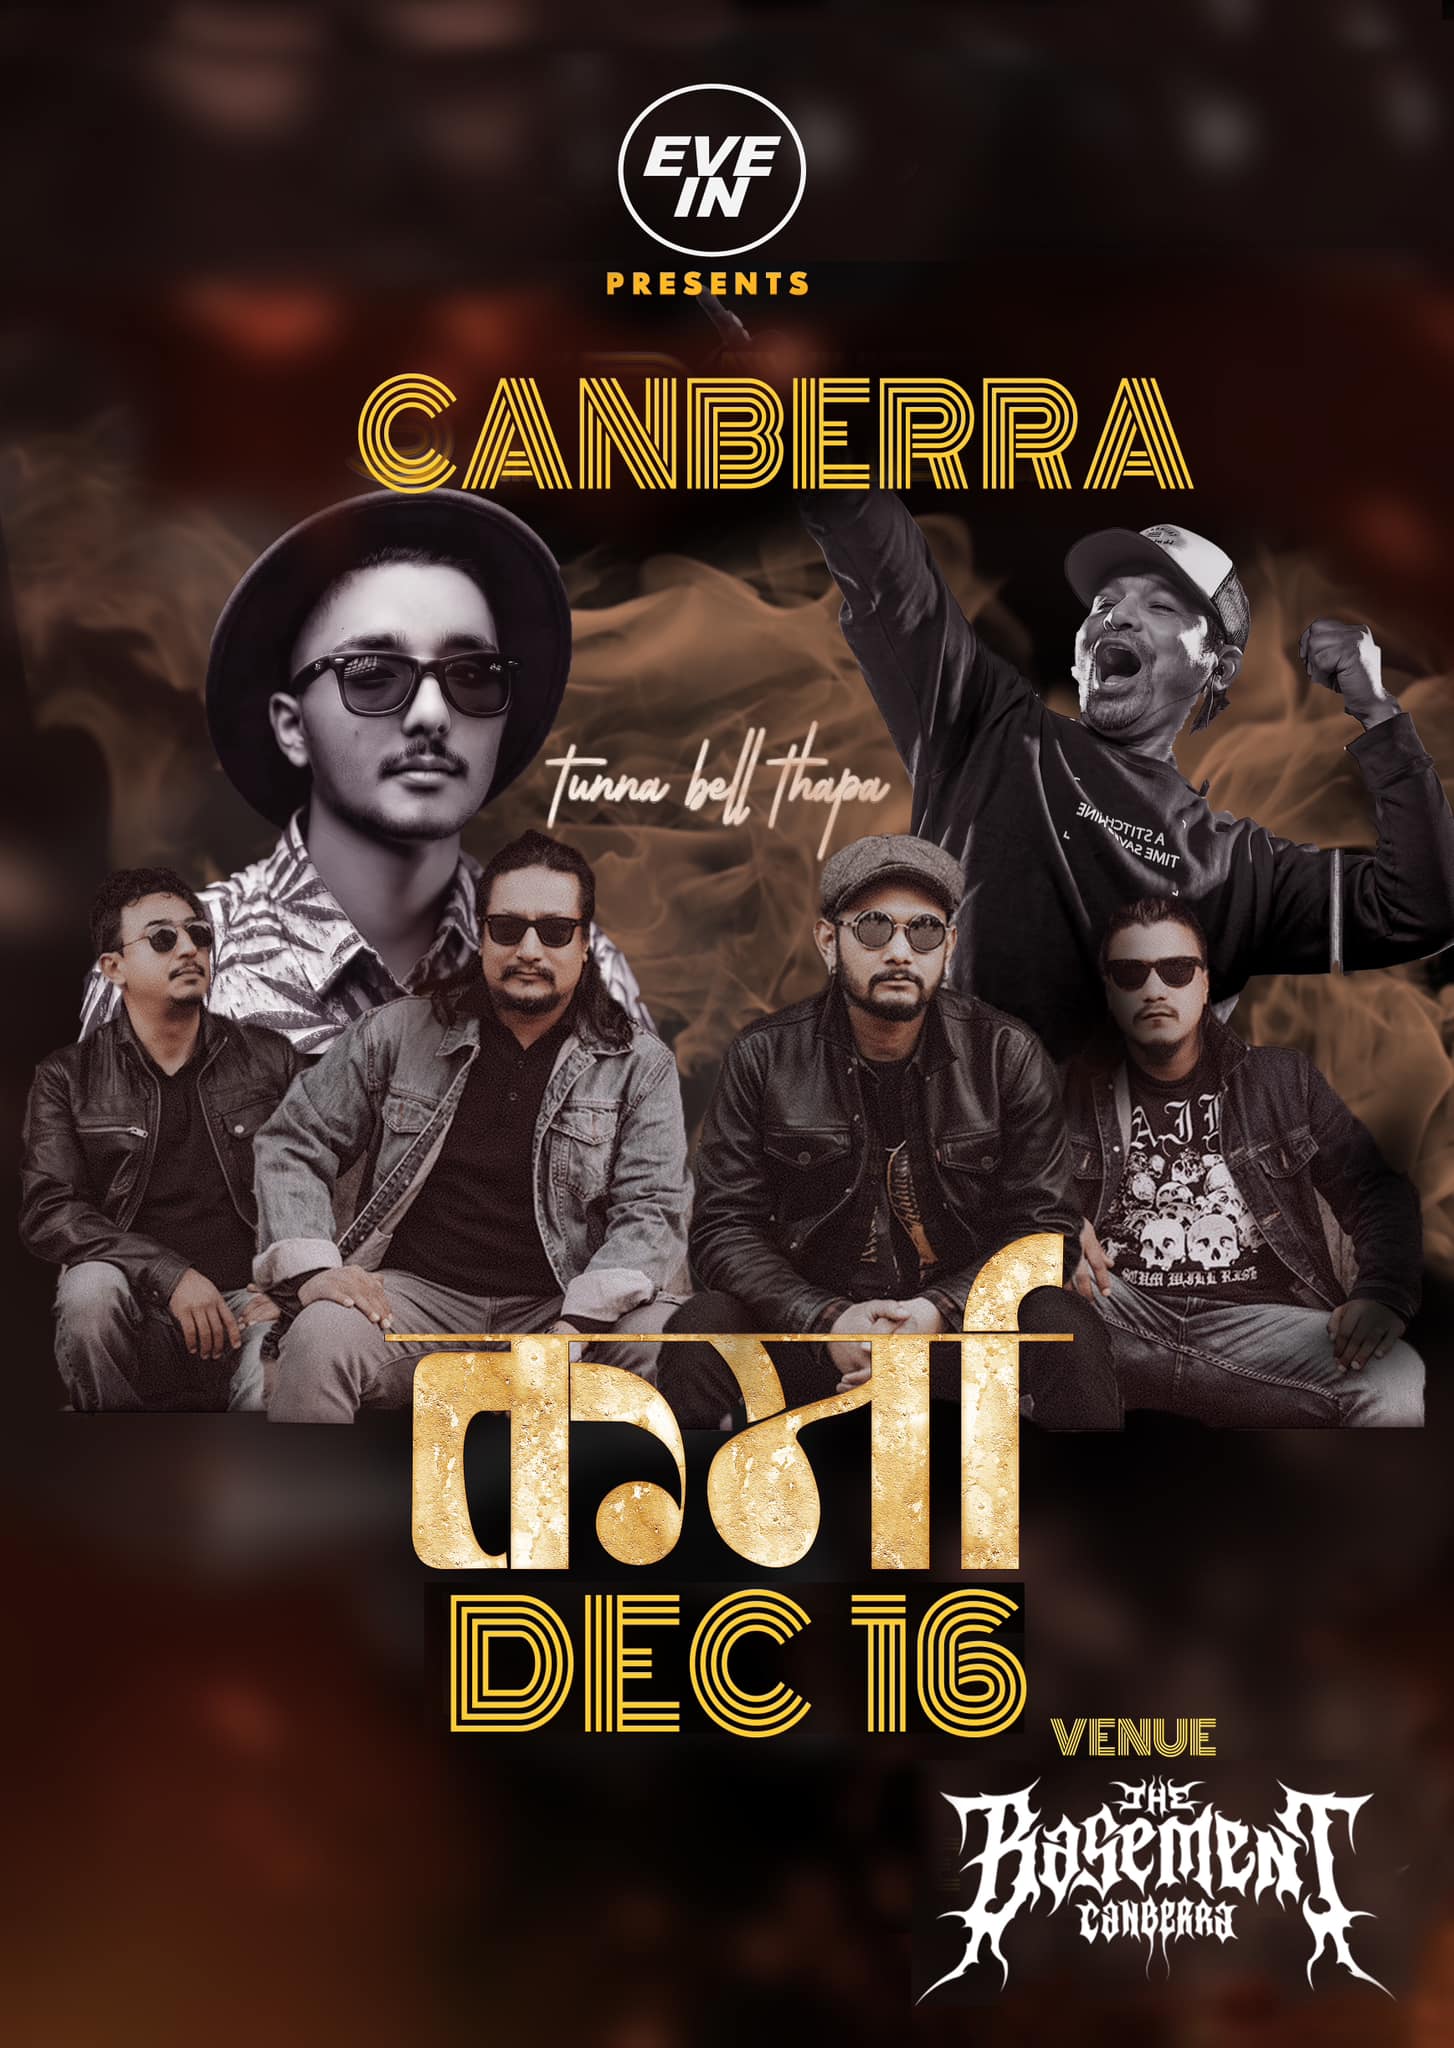 Karma Band and Tunna Bell Thapa Live in Canberra